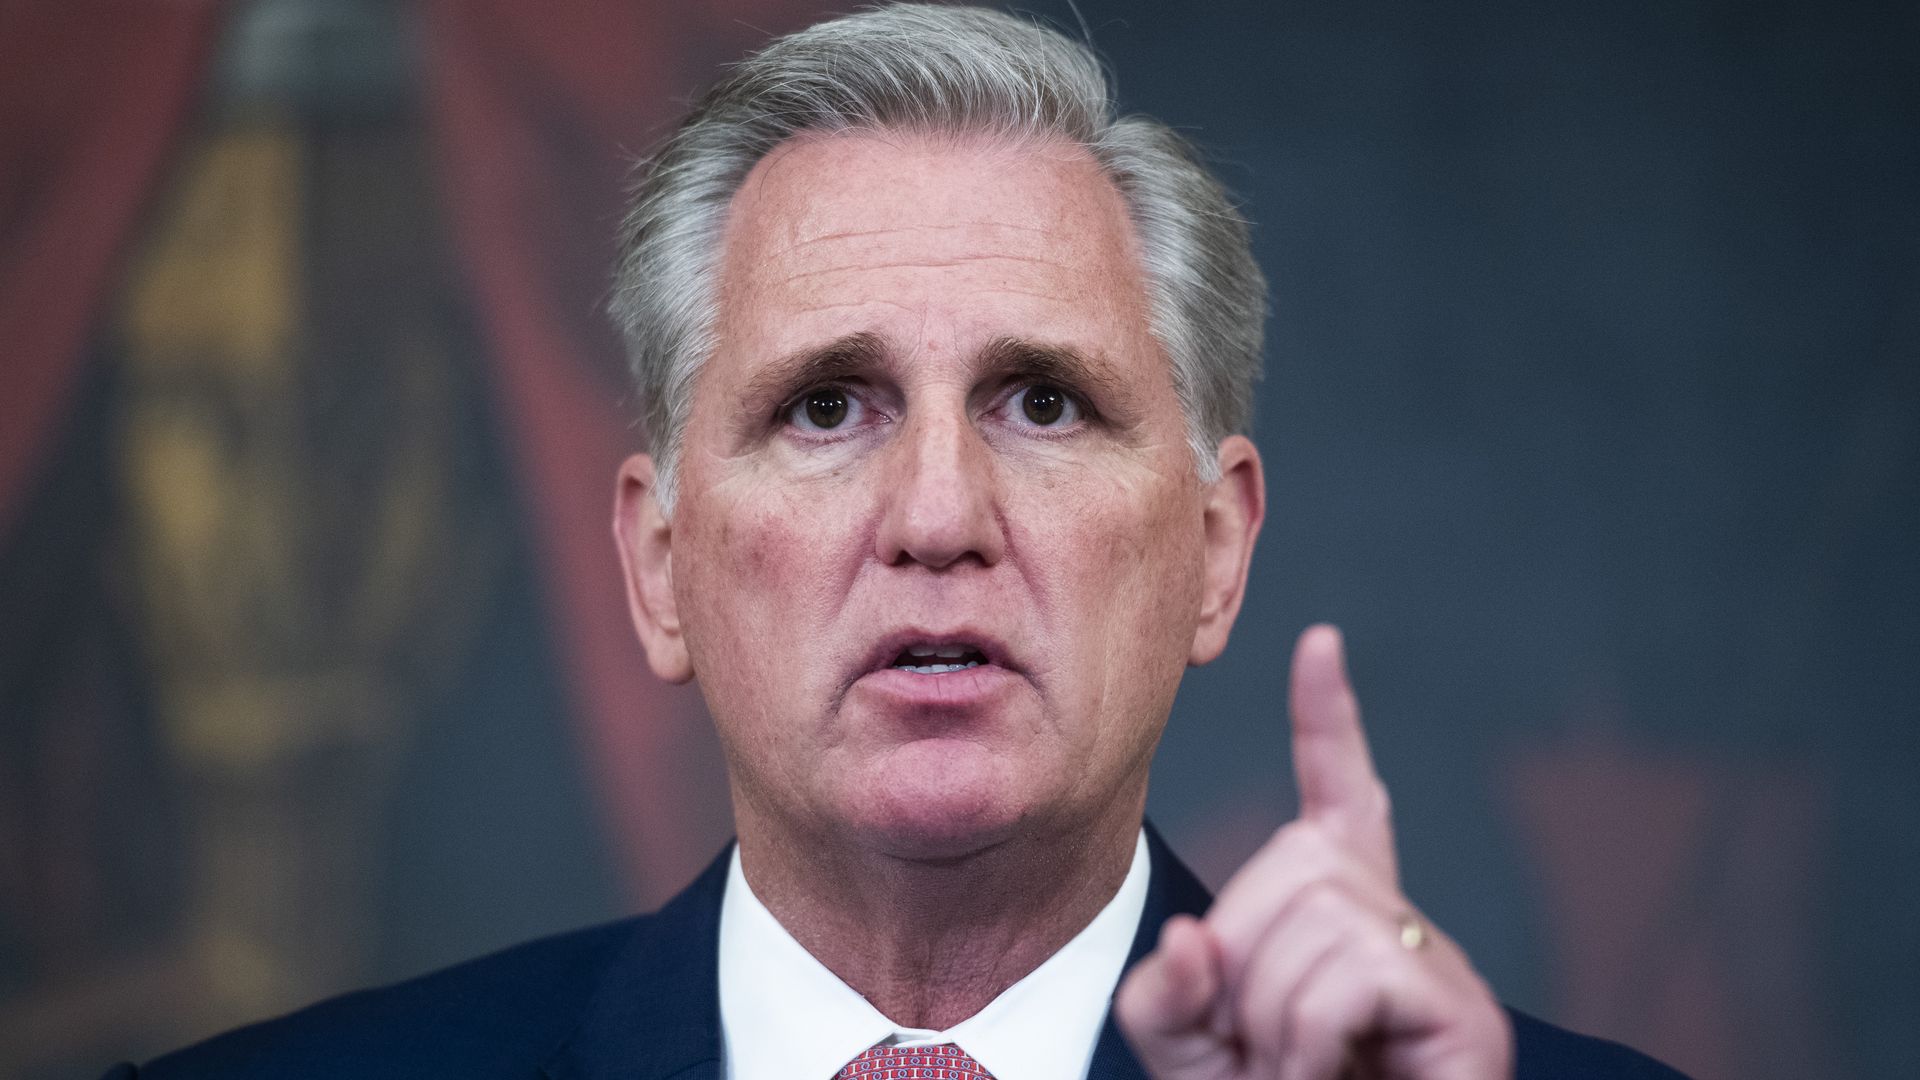 Kevin McCarthy gears up to run for Speaker in 2022 - Axios